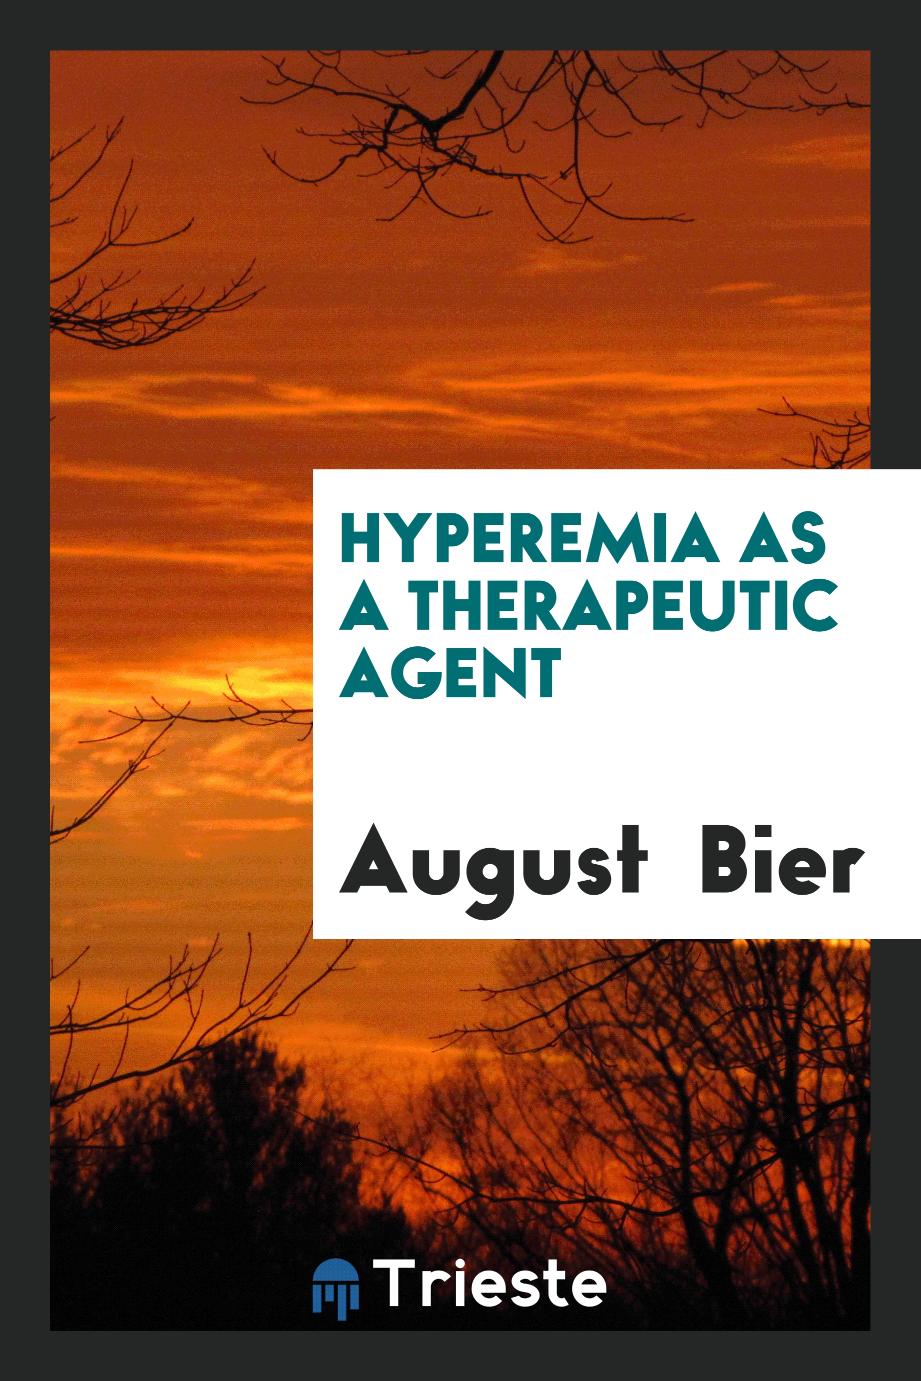 Hyperemia as a therapeutic agent